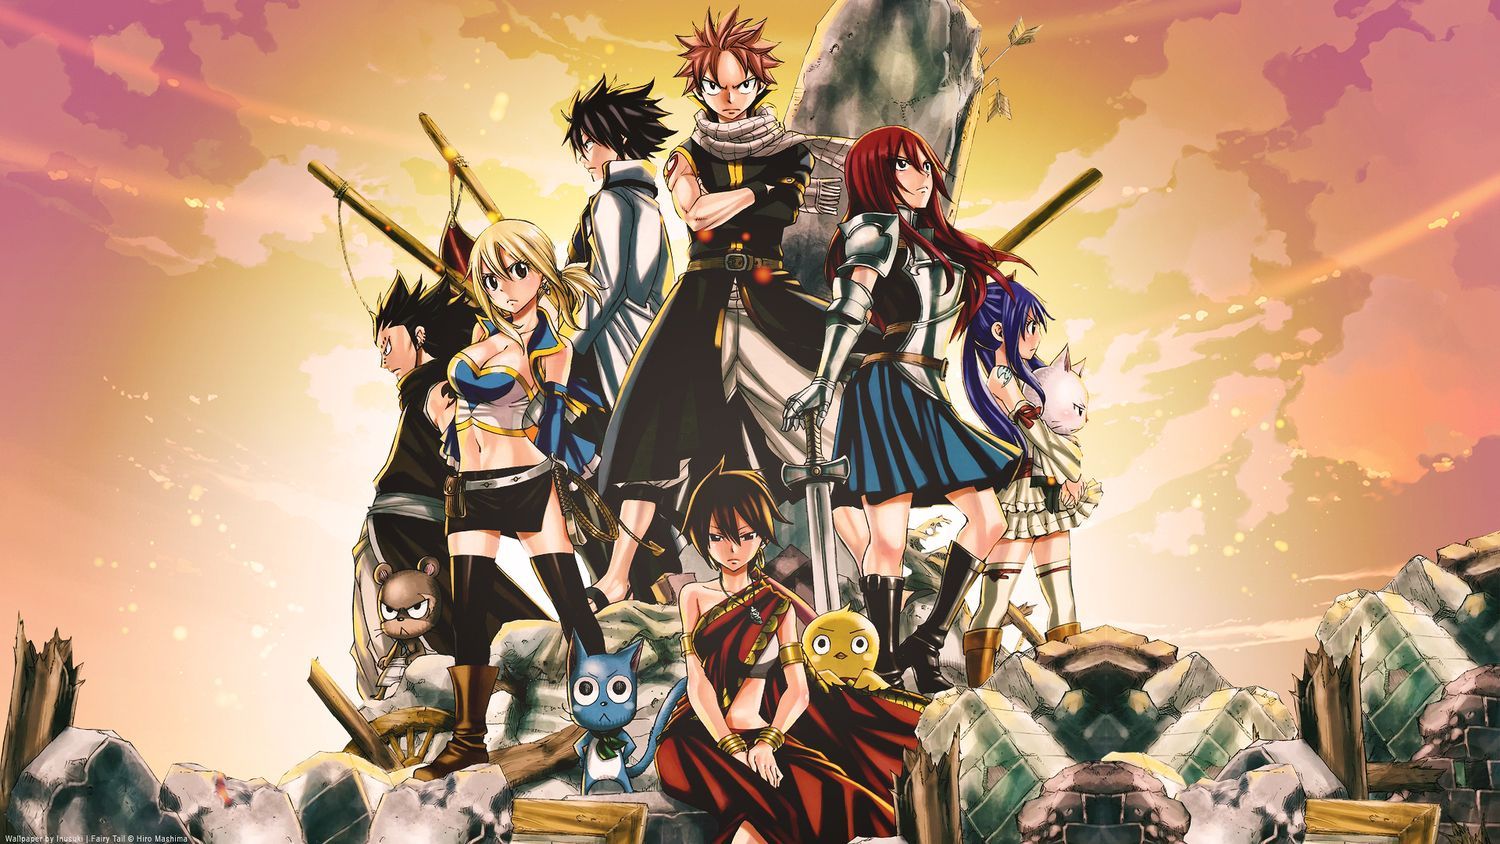 Cool Fairy Tail Wallpapers Group 81 Images, Photos, Reviews